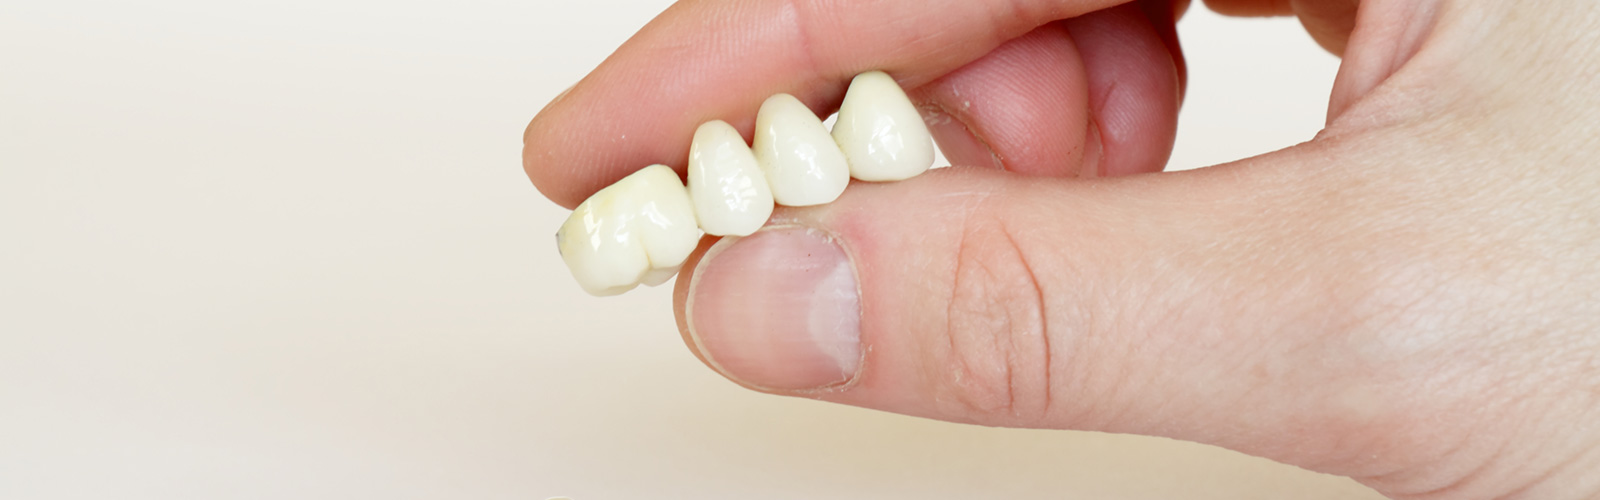 A hand holding a Dental Bridges over a white background.